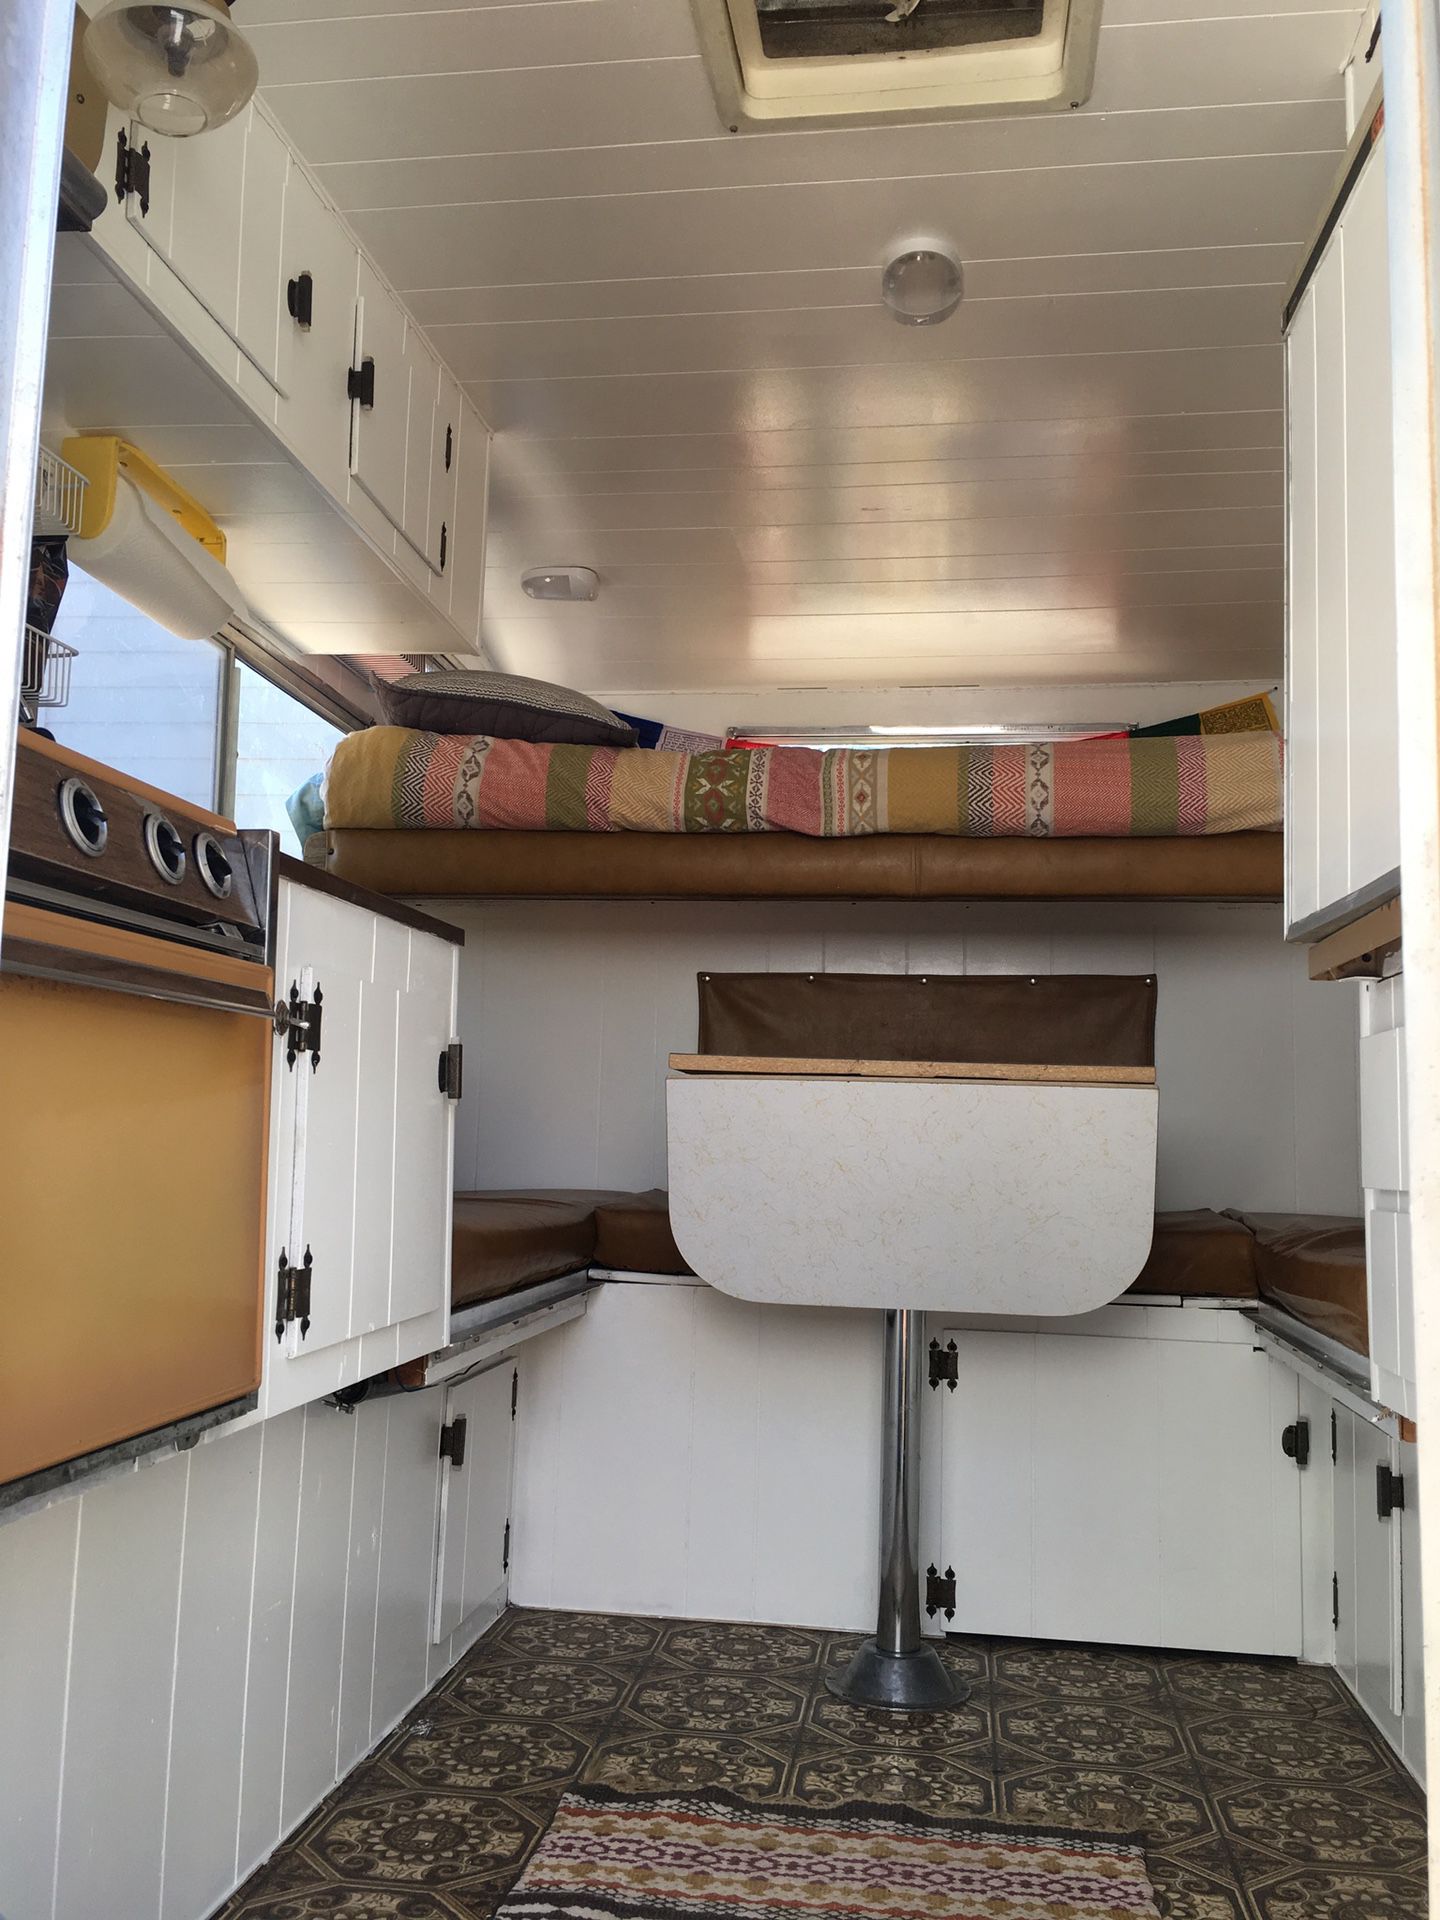 Updated 1970s Slide-in Camper with Hydraulic Jacks, Sink, Stove, Fridge, and Lights! Can sleep 4.